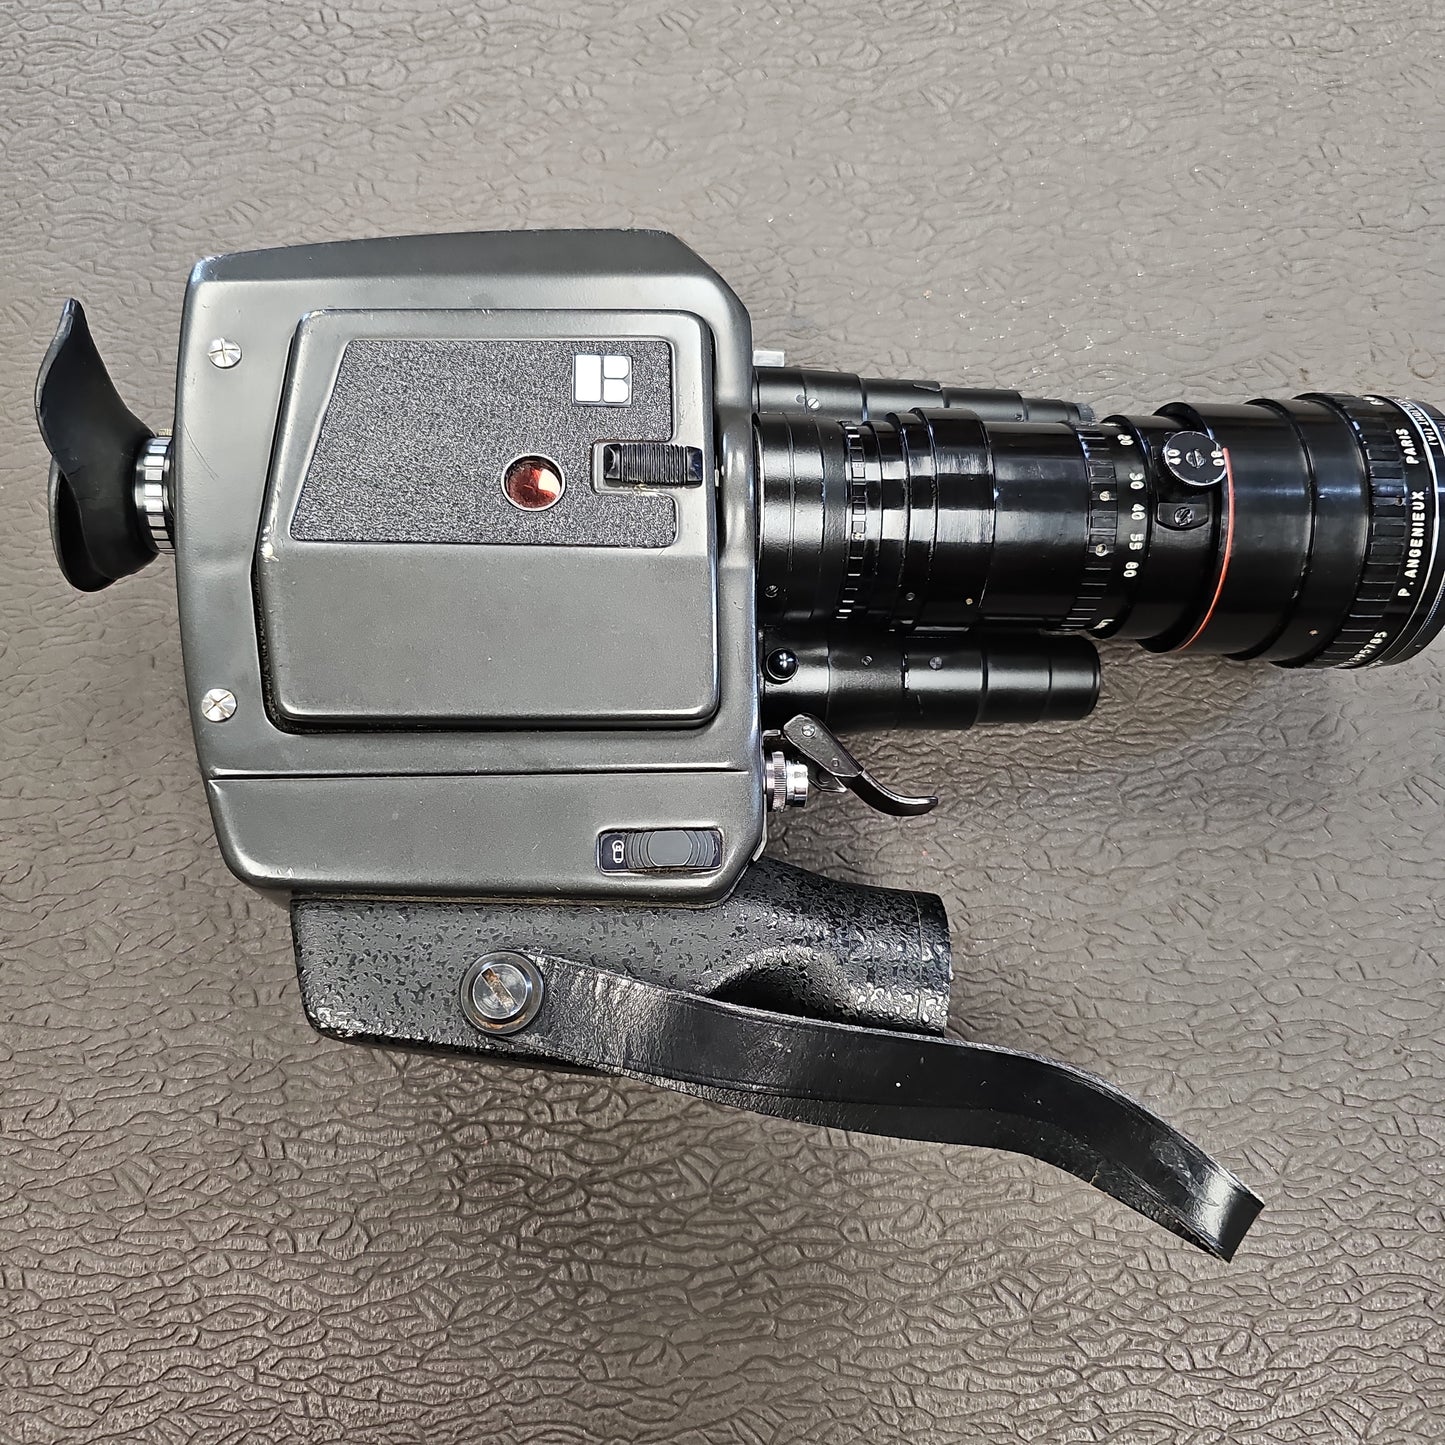 Beaulieu 5008.S Super 8mm Camera S#440769 with Angenieux 6-80mm T1.2 Zoom lens S# 1395785